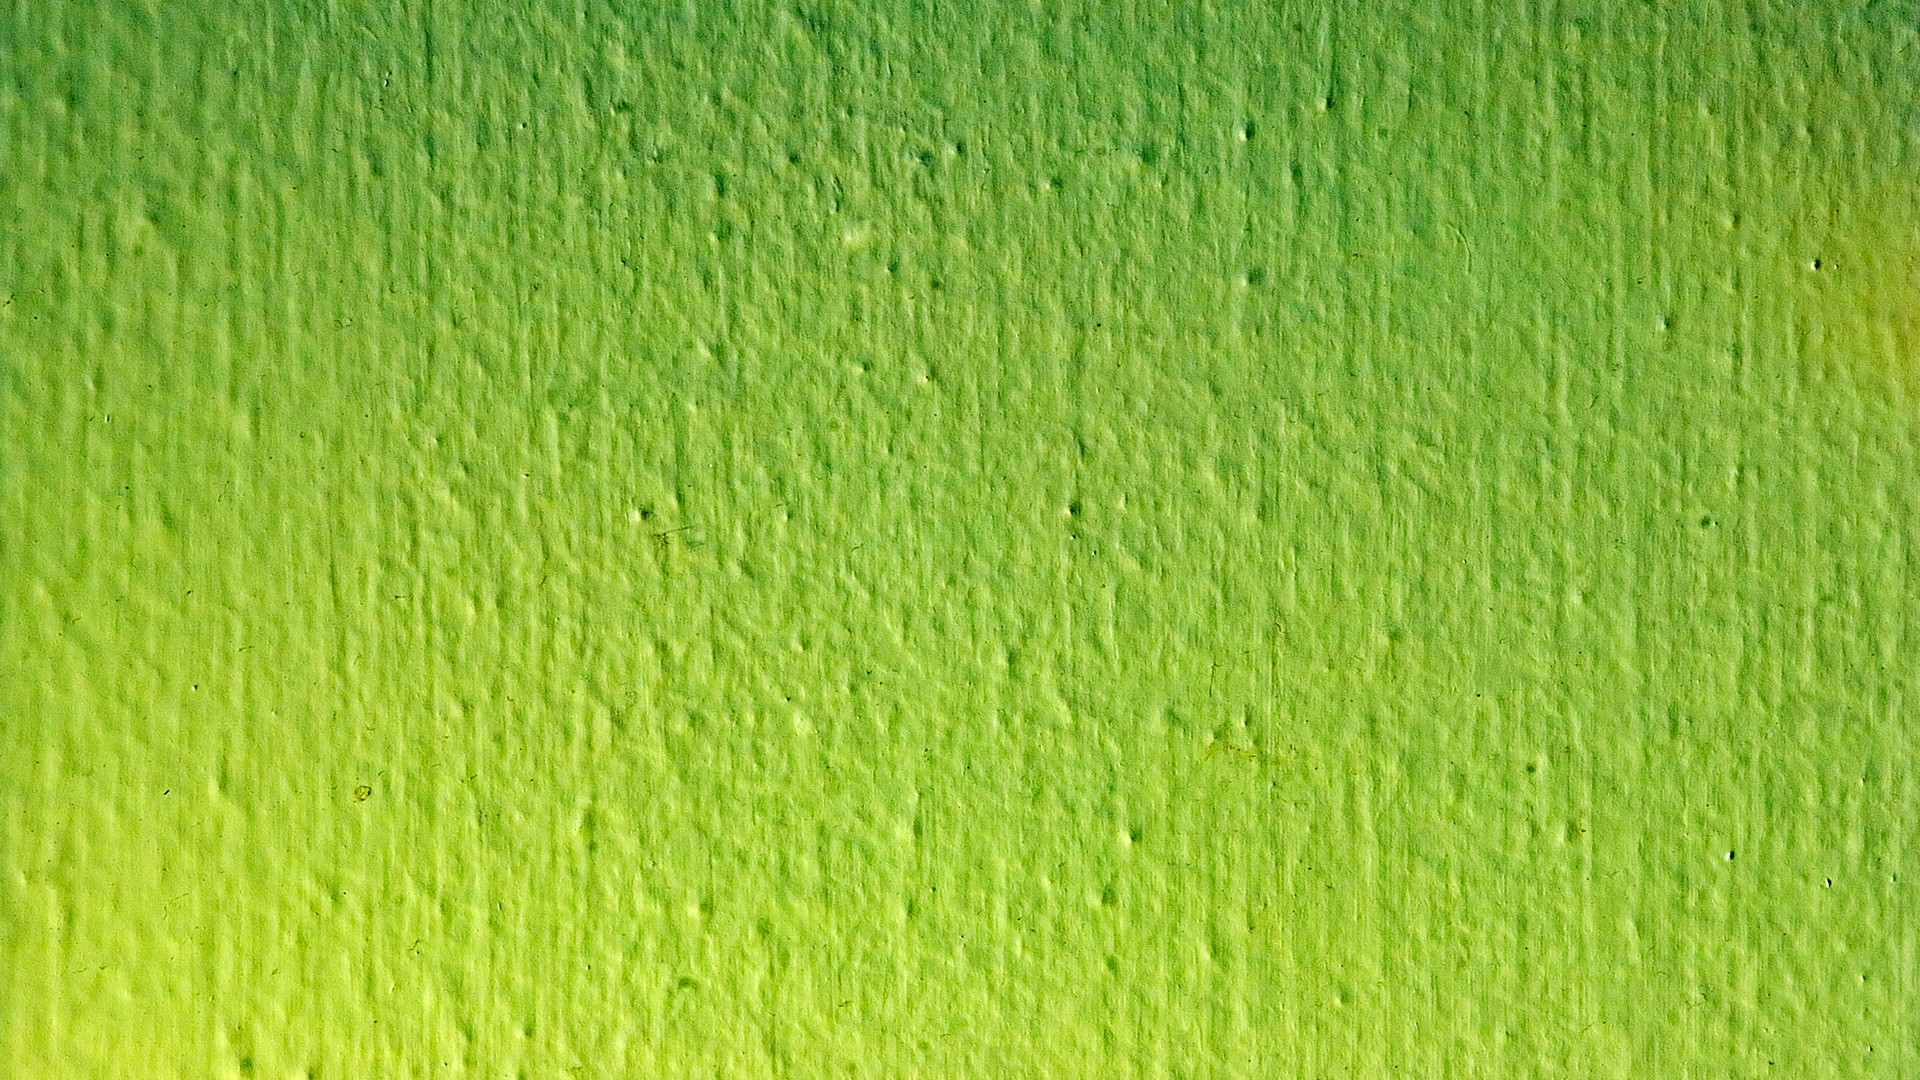 Desktop Wallpaper Lime Green with image resolution 1920x1080 pixel. You can use this wallpaper as background for your desktop Computer Screensavers, Android or iPhone smartphones